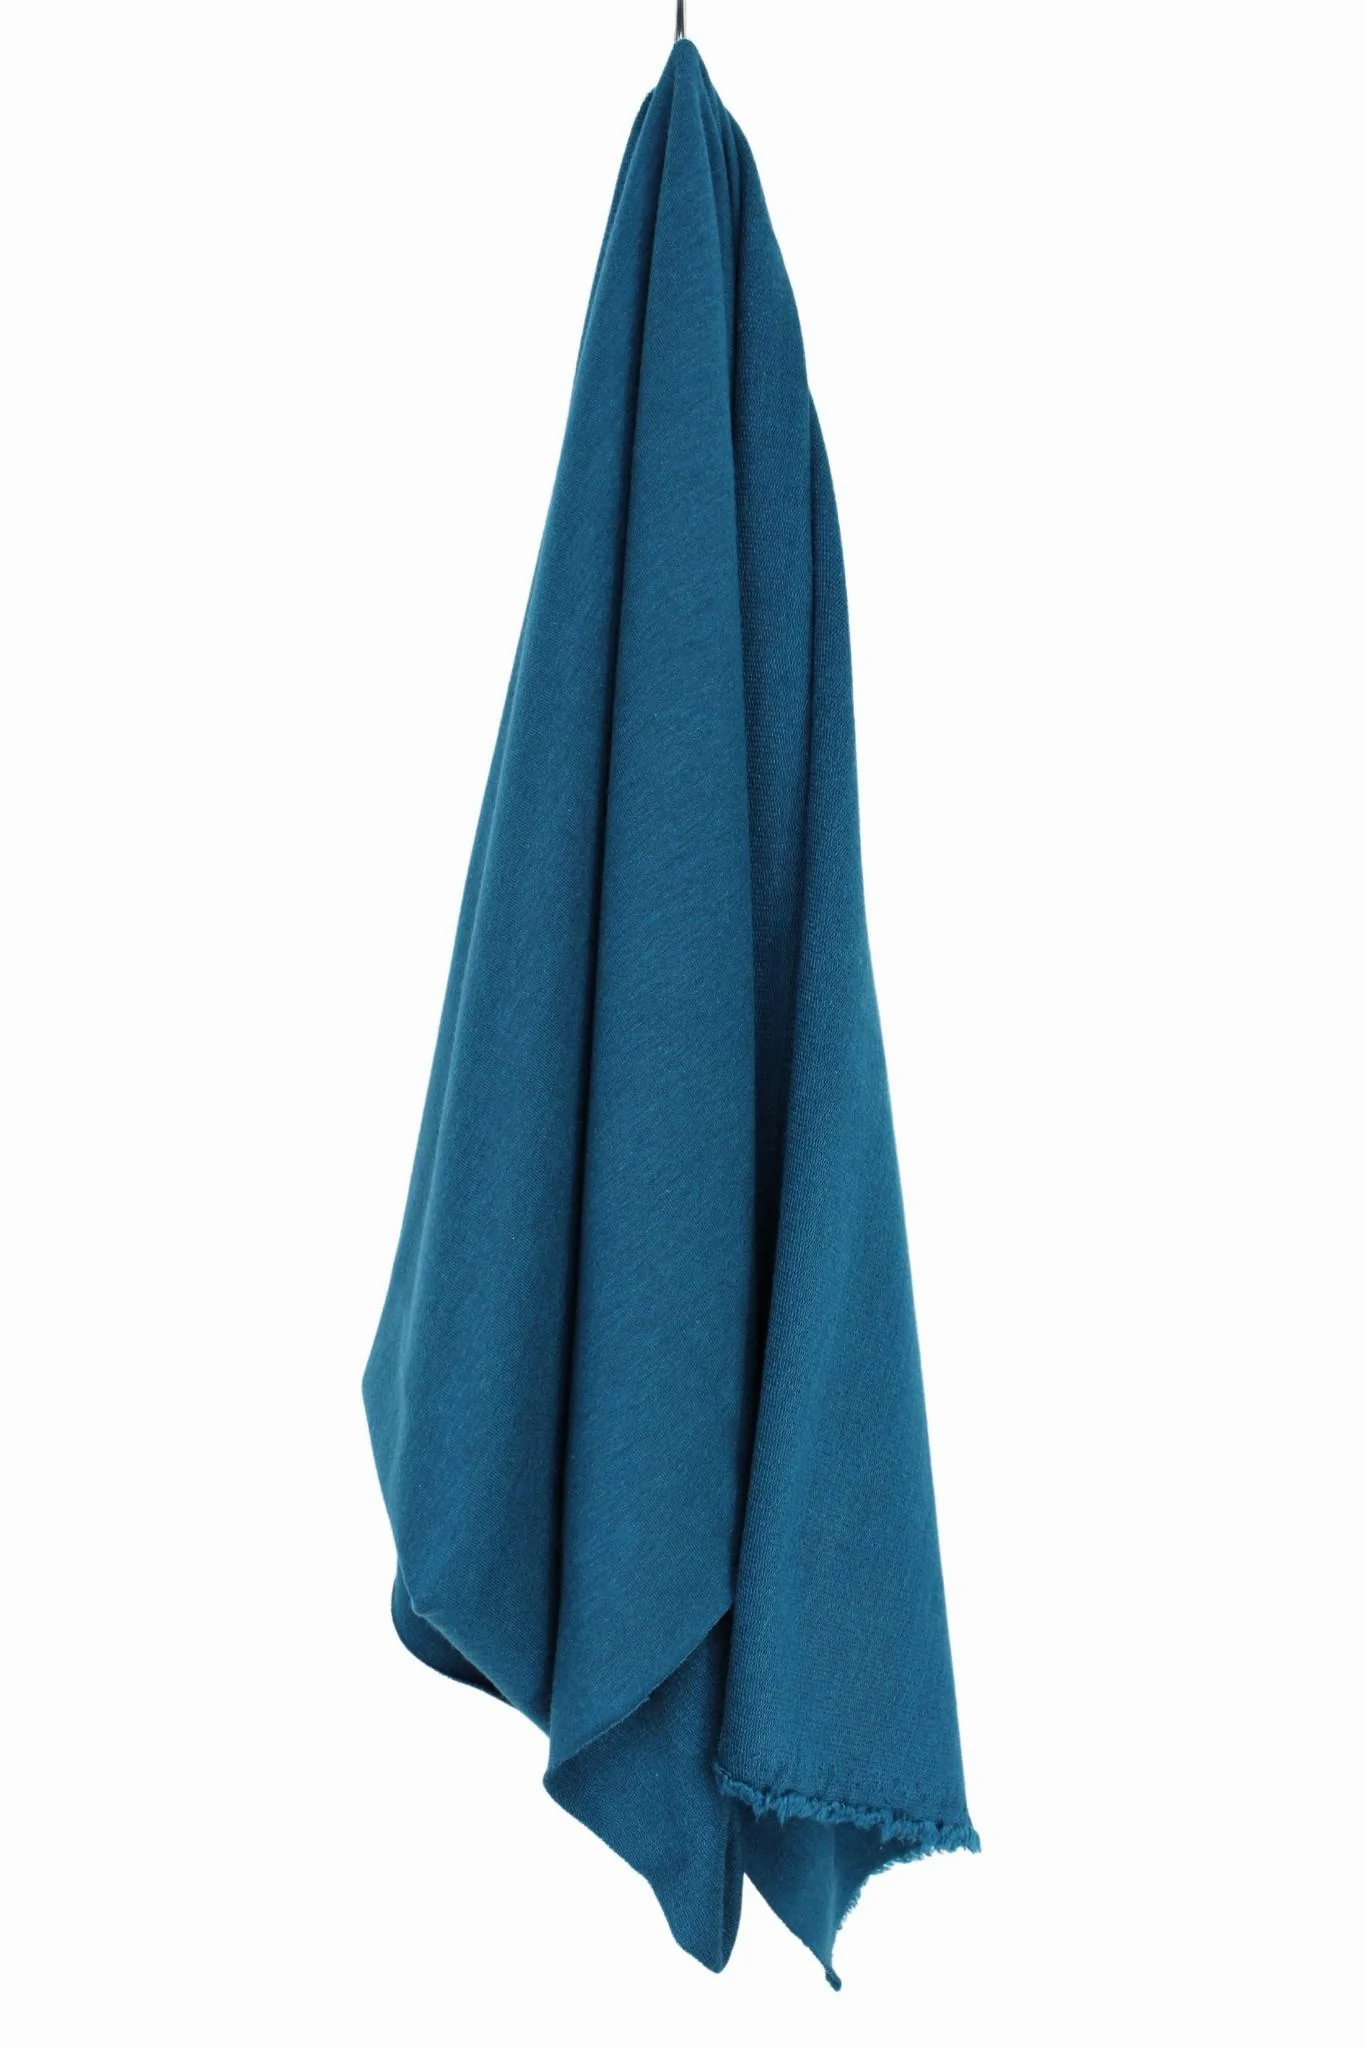 TENCEL™ Lyocell Organic Cotton French Terry - Moroccan Blue